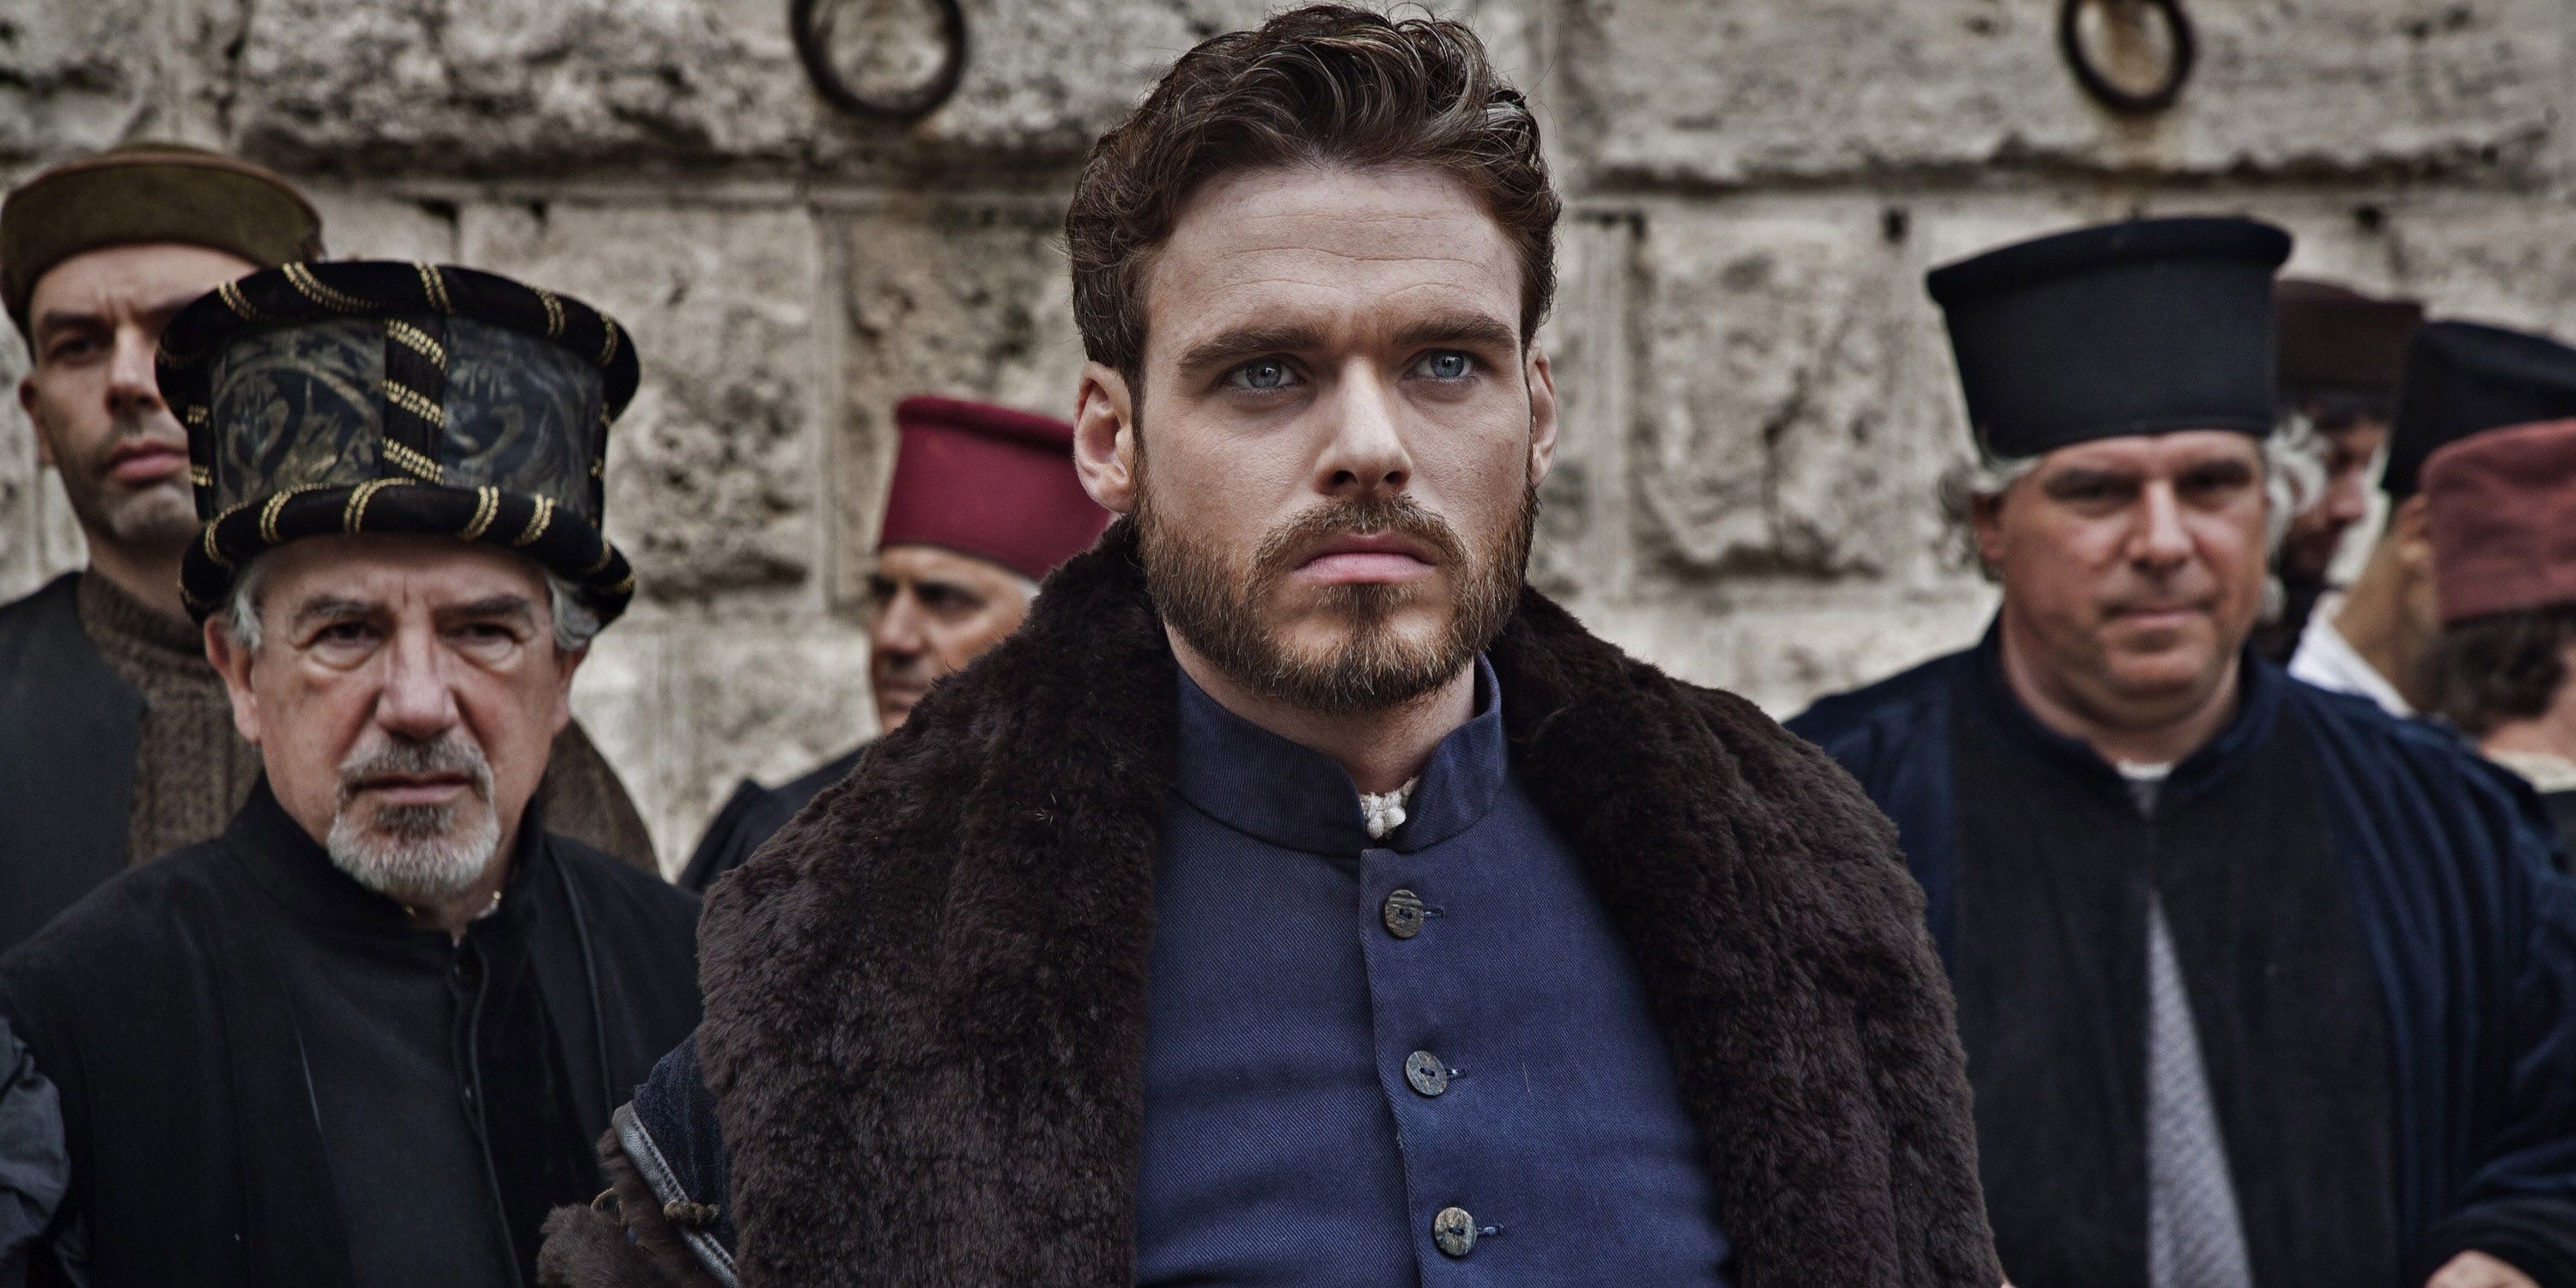 Richard Madden in a blue suit and fur surrounded by people in Medici.